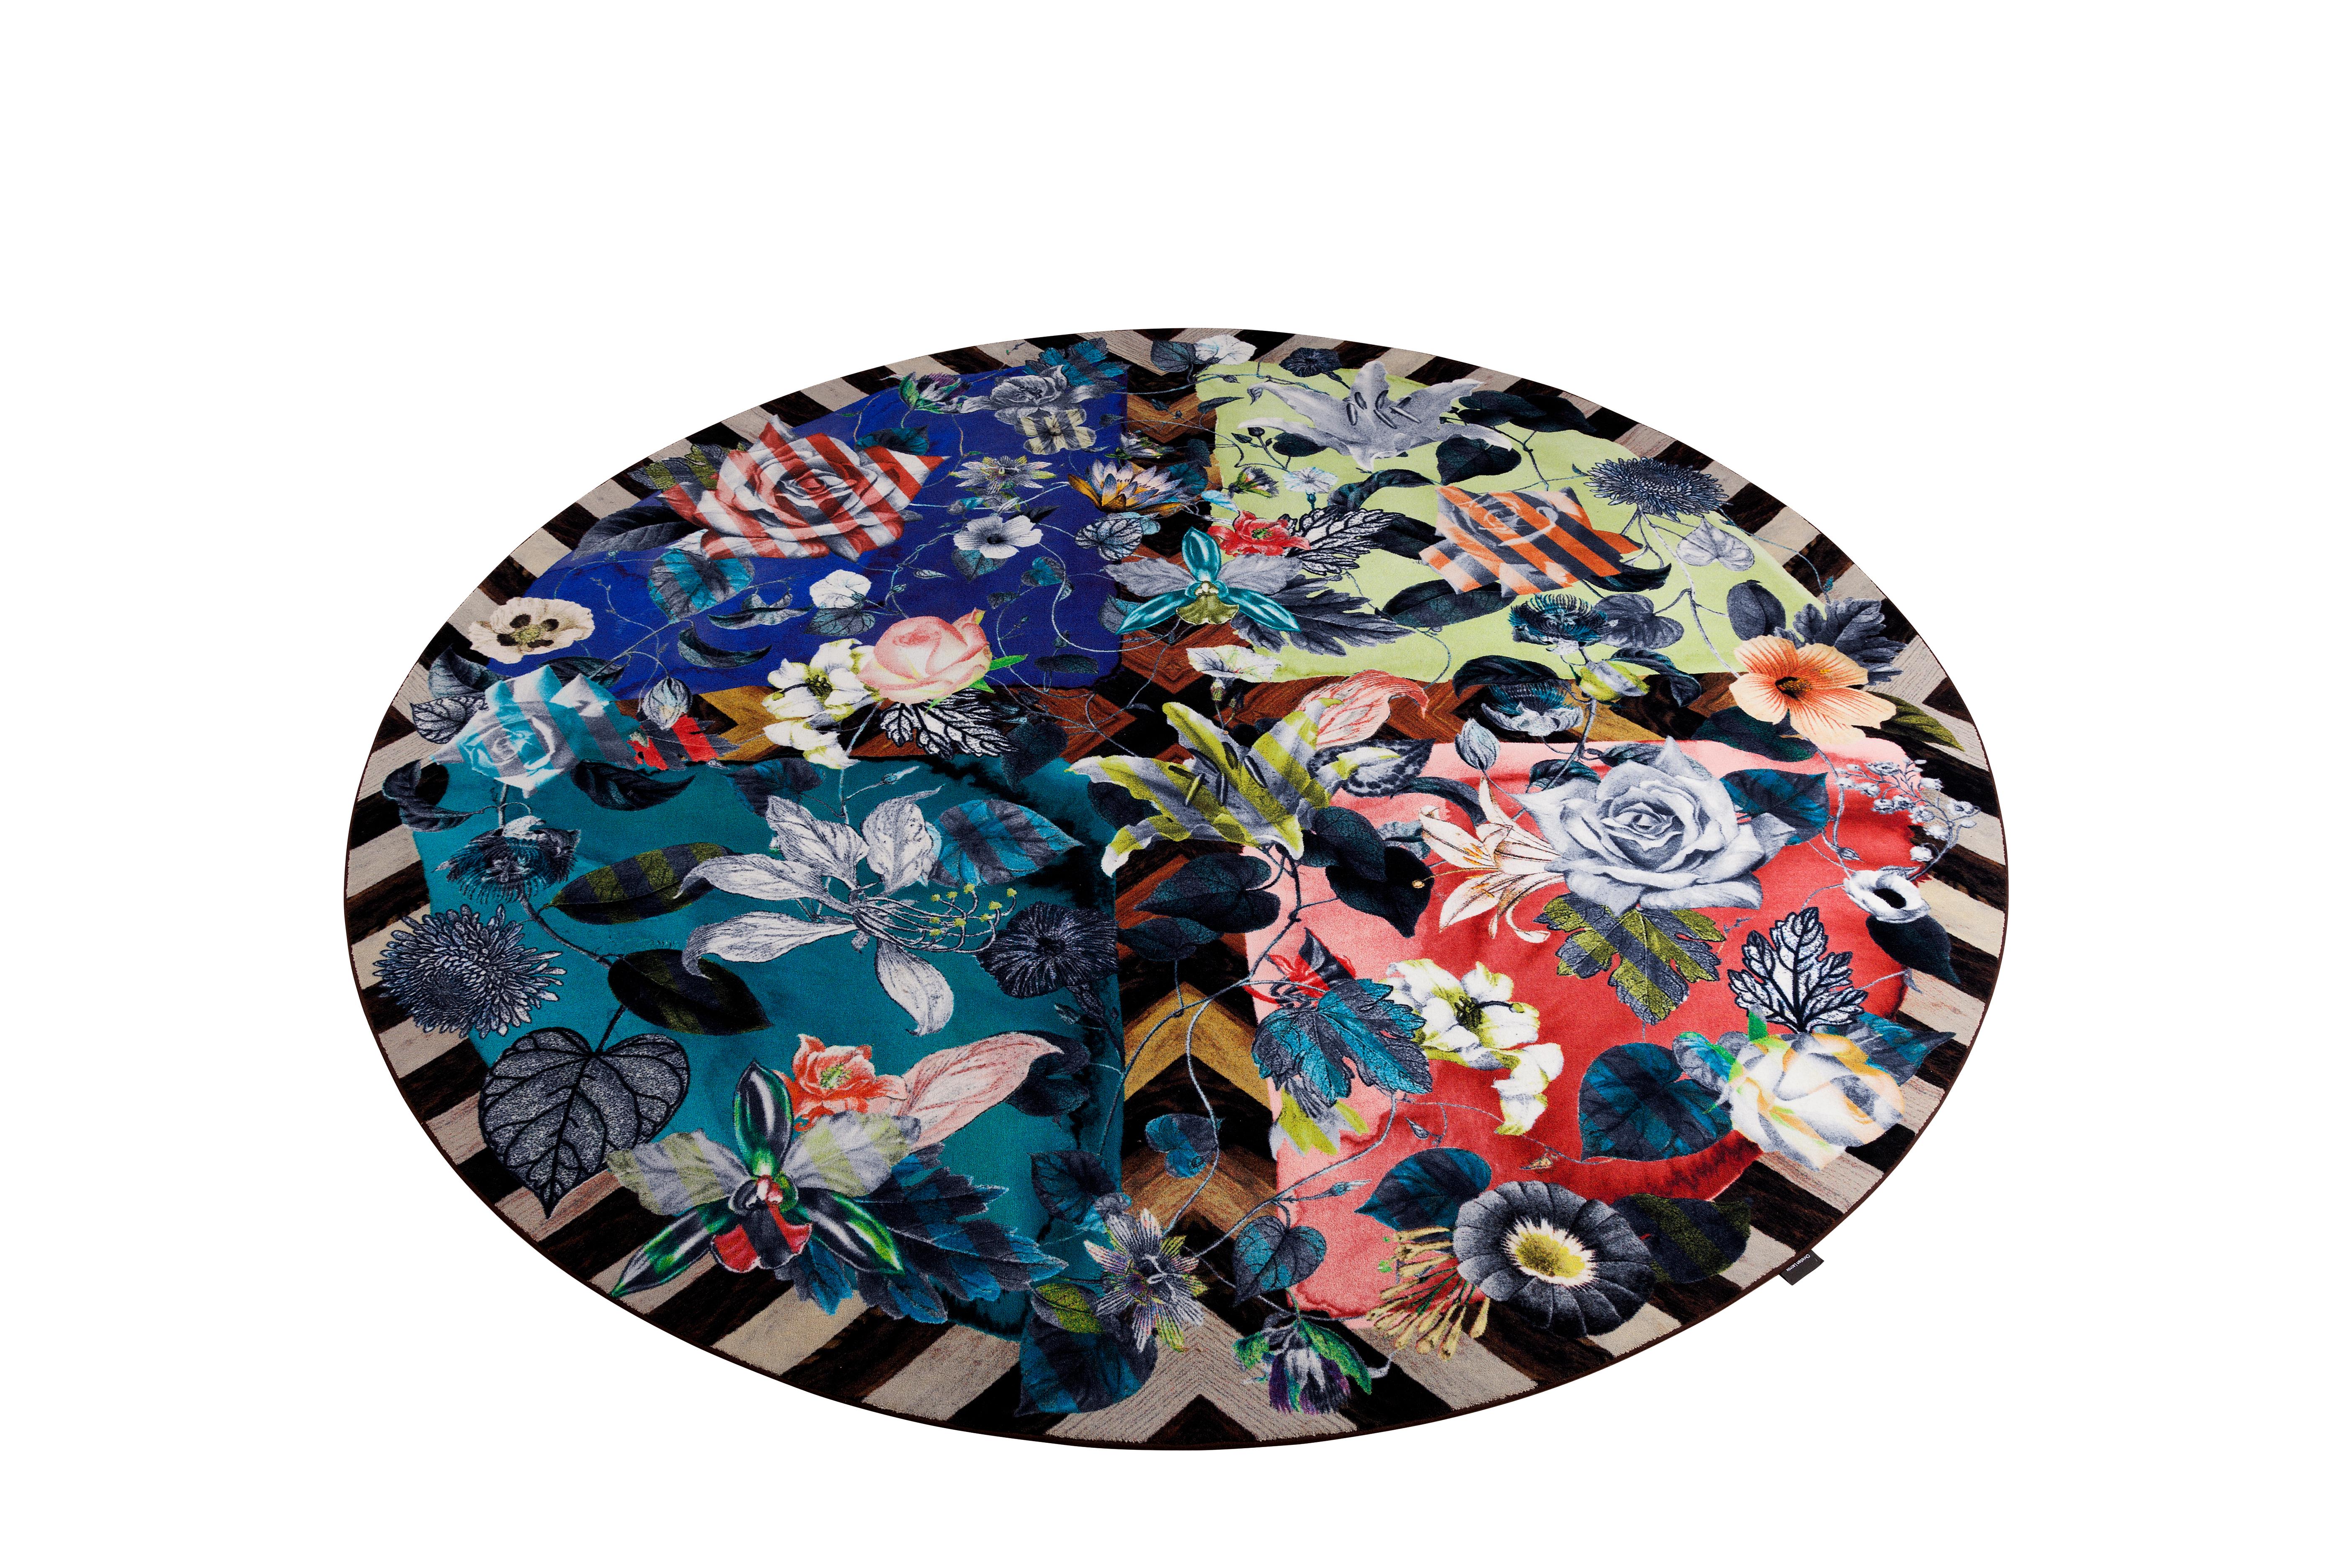 Moooi large Guimauve rug in low pile polyamide by Christian Lacroix Maison

Since the launch of the Couture House in 1987, the Christian Lacroix style has been unique, exuberant, colorful and baroque. Today, Christian Lacroix Maison expresses its